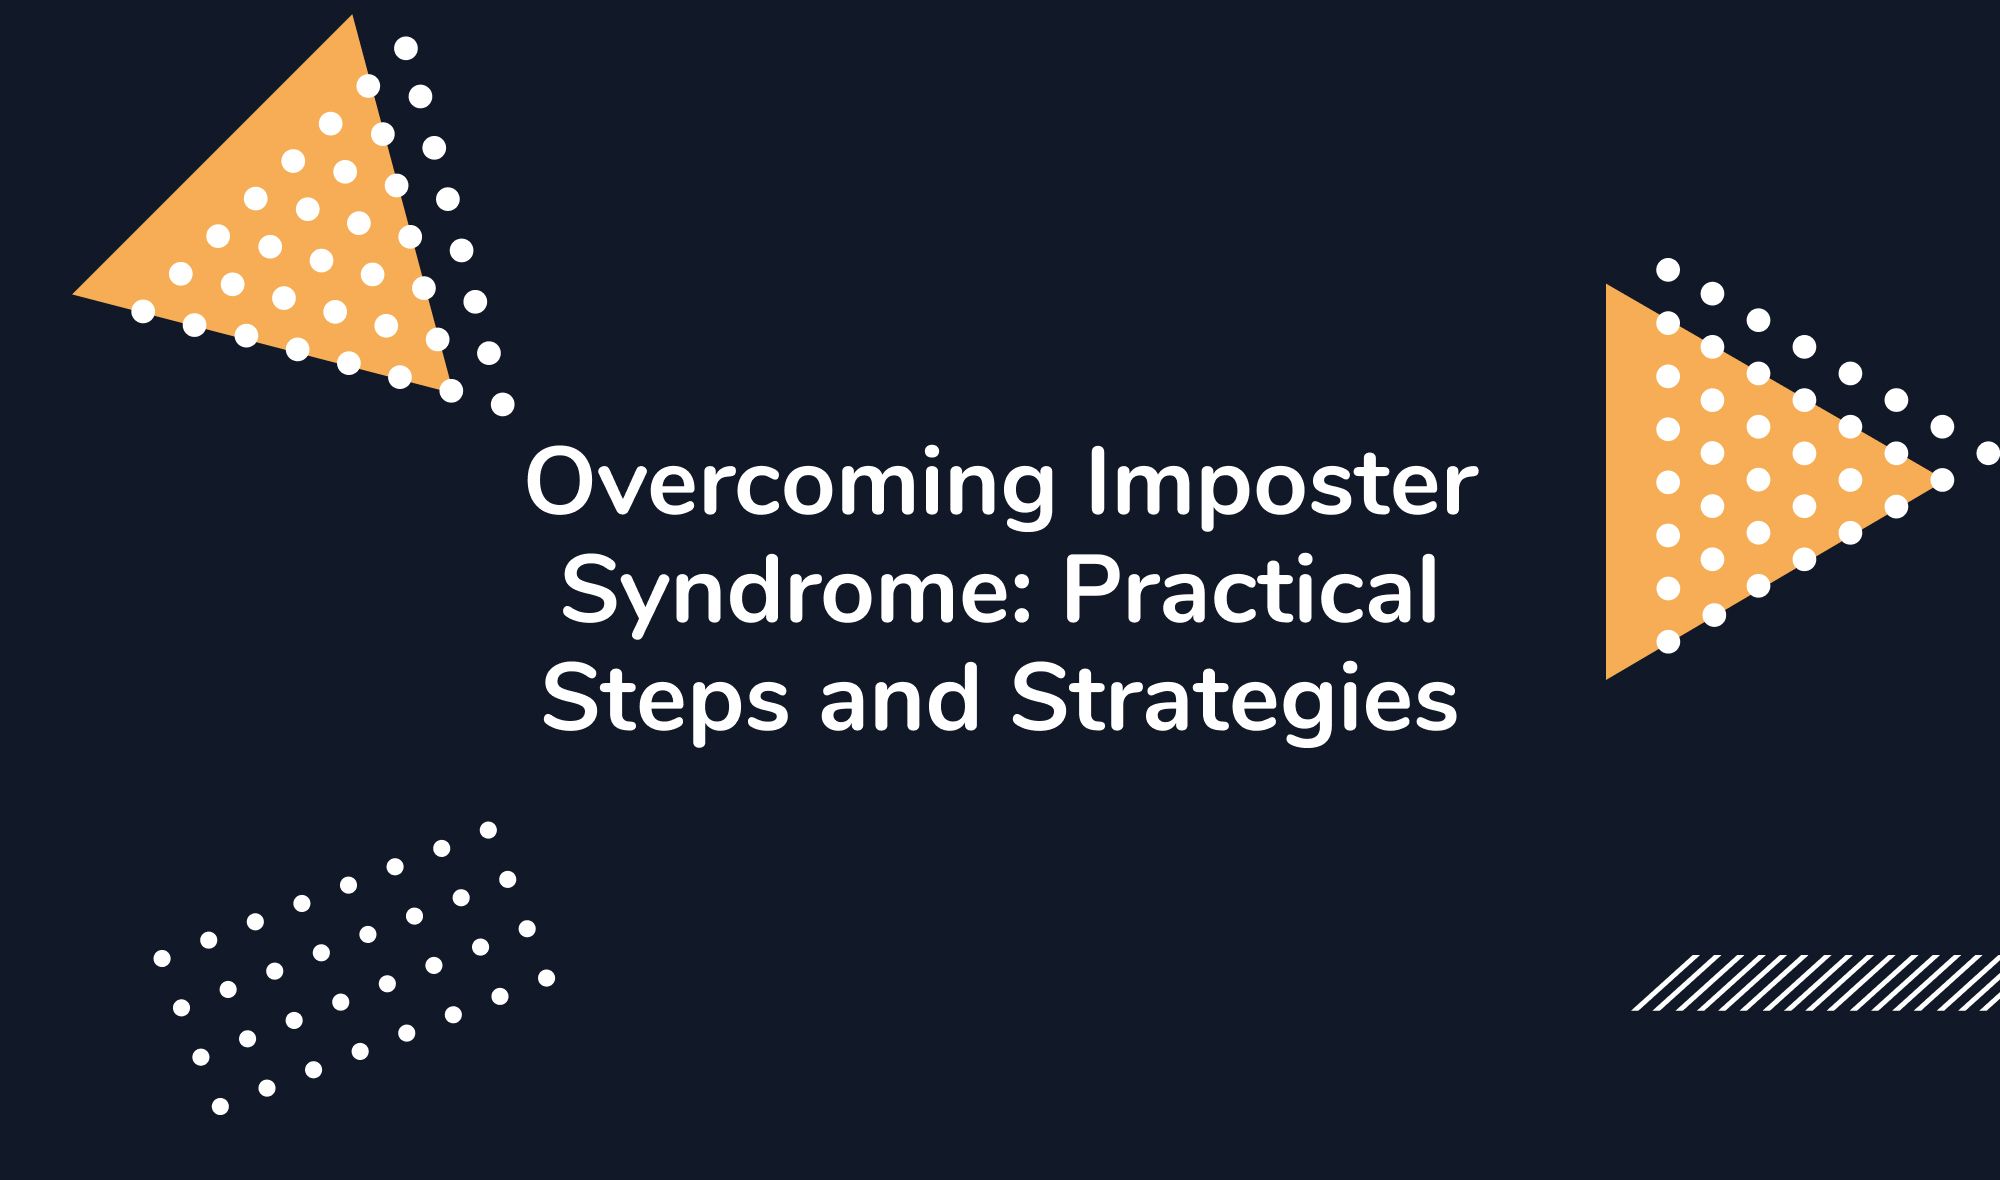 Overcoming Imposter Syndrome: Practical Steps and Strategies